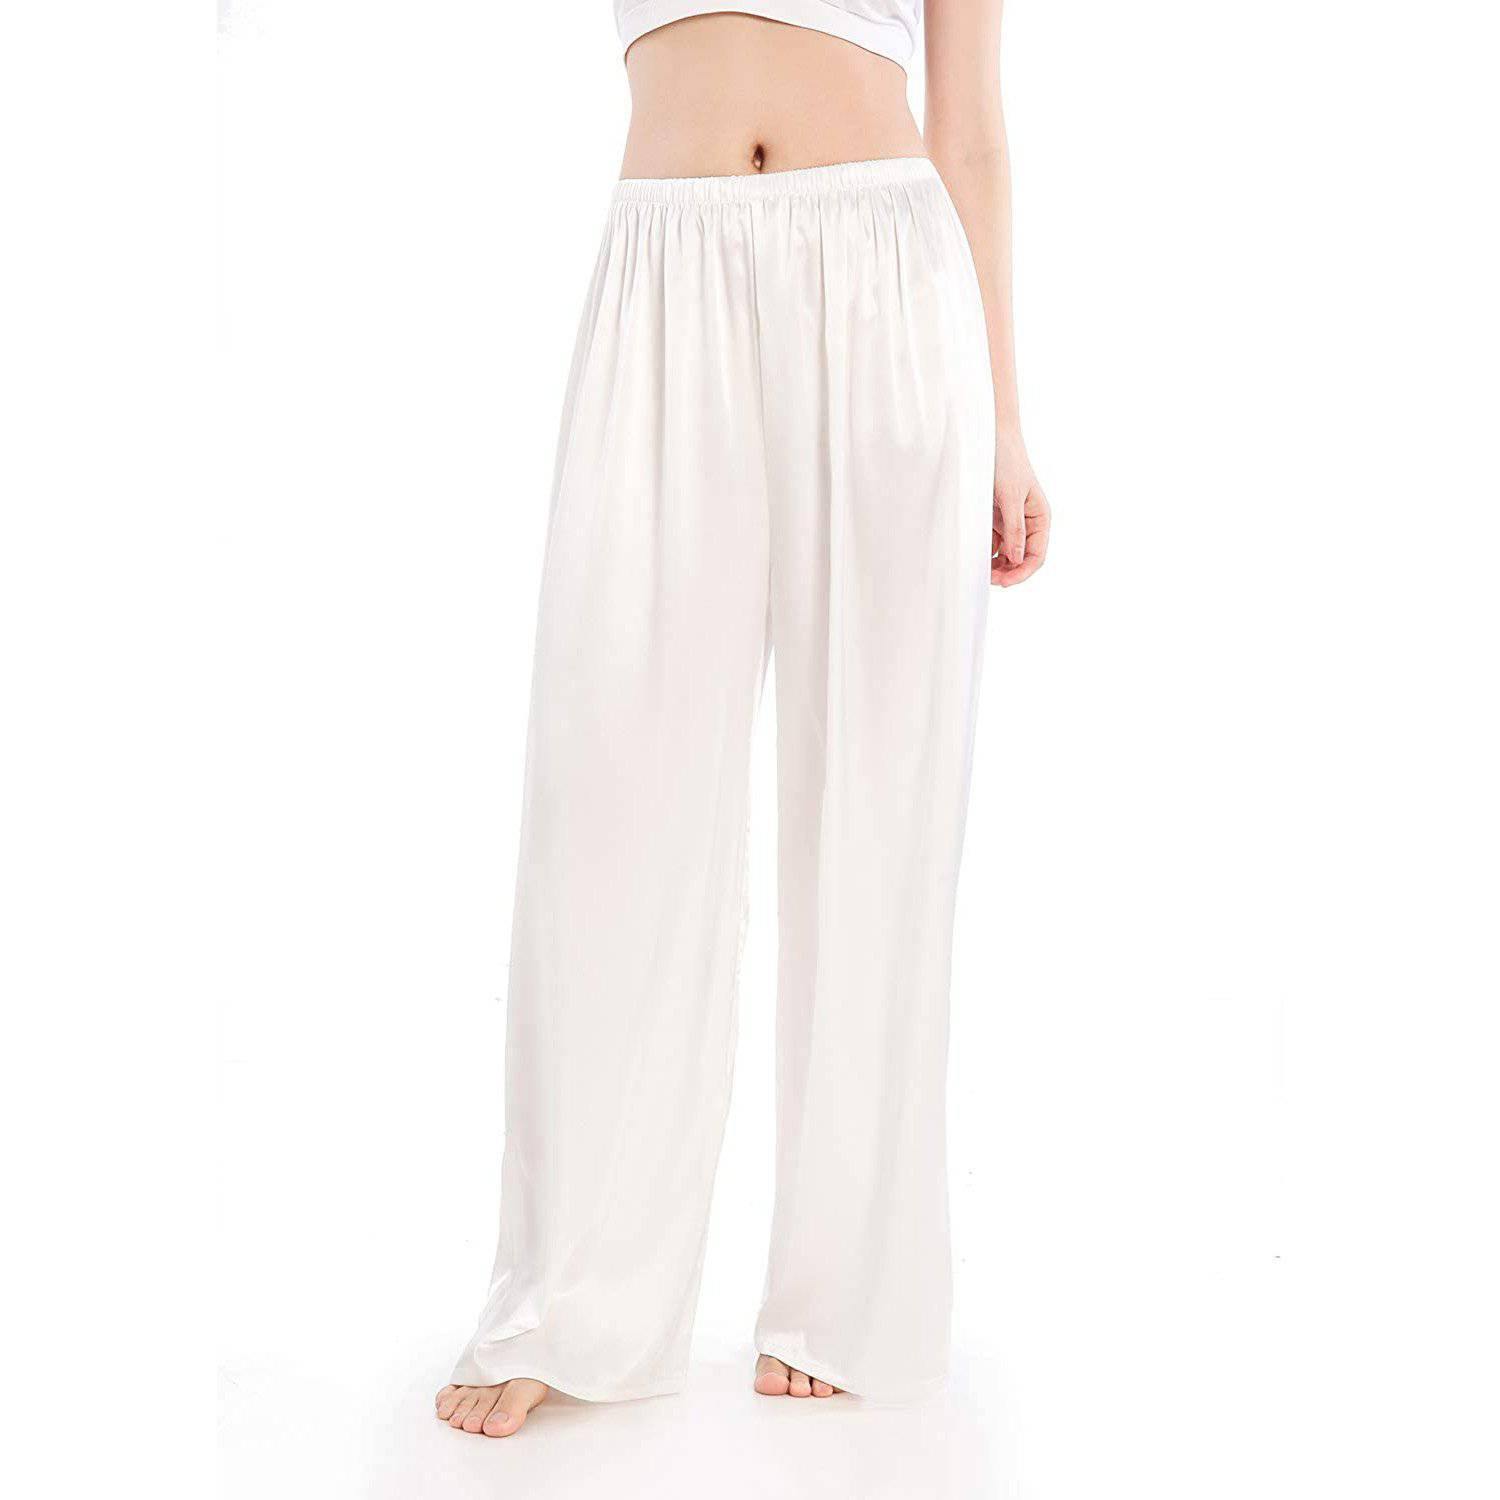  White Pants Suit for Women High Waist Adjustable Baggy